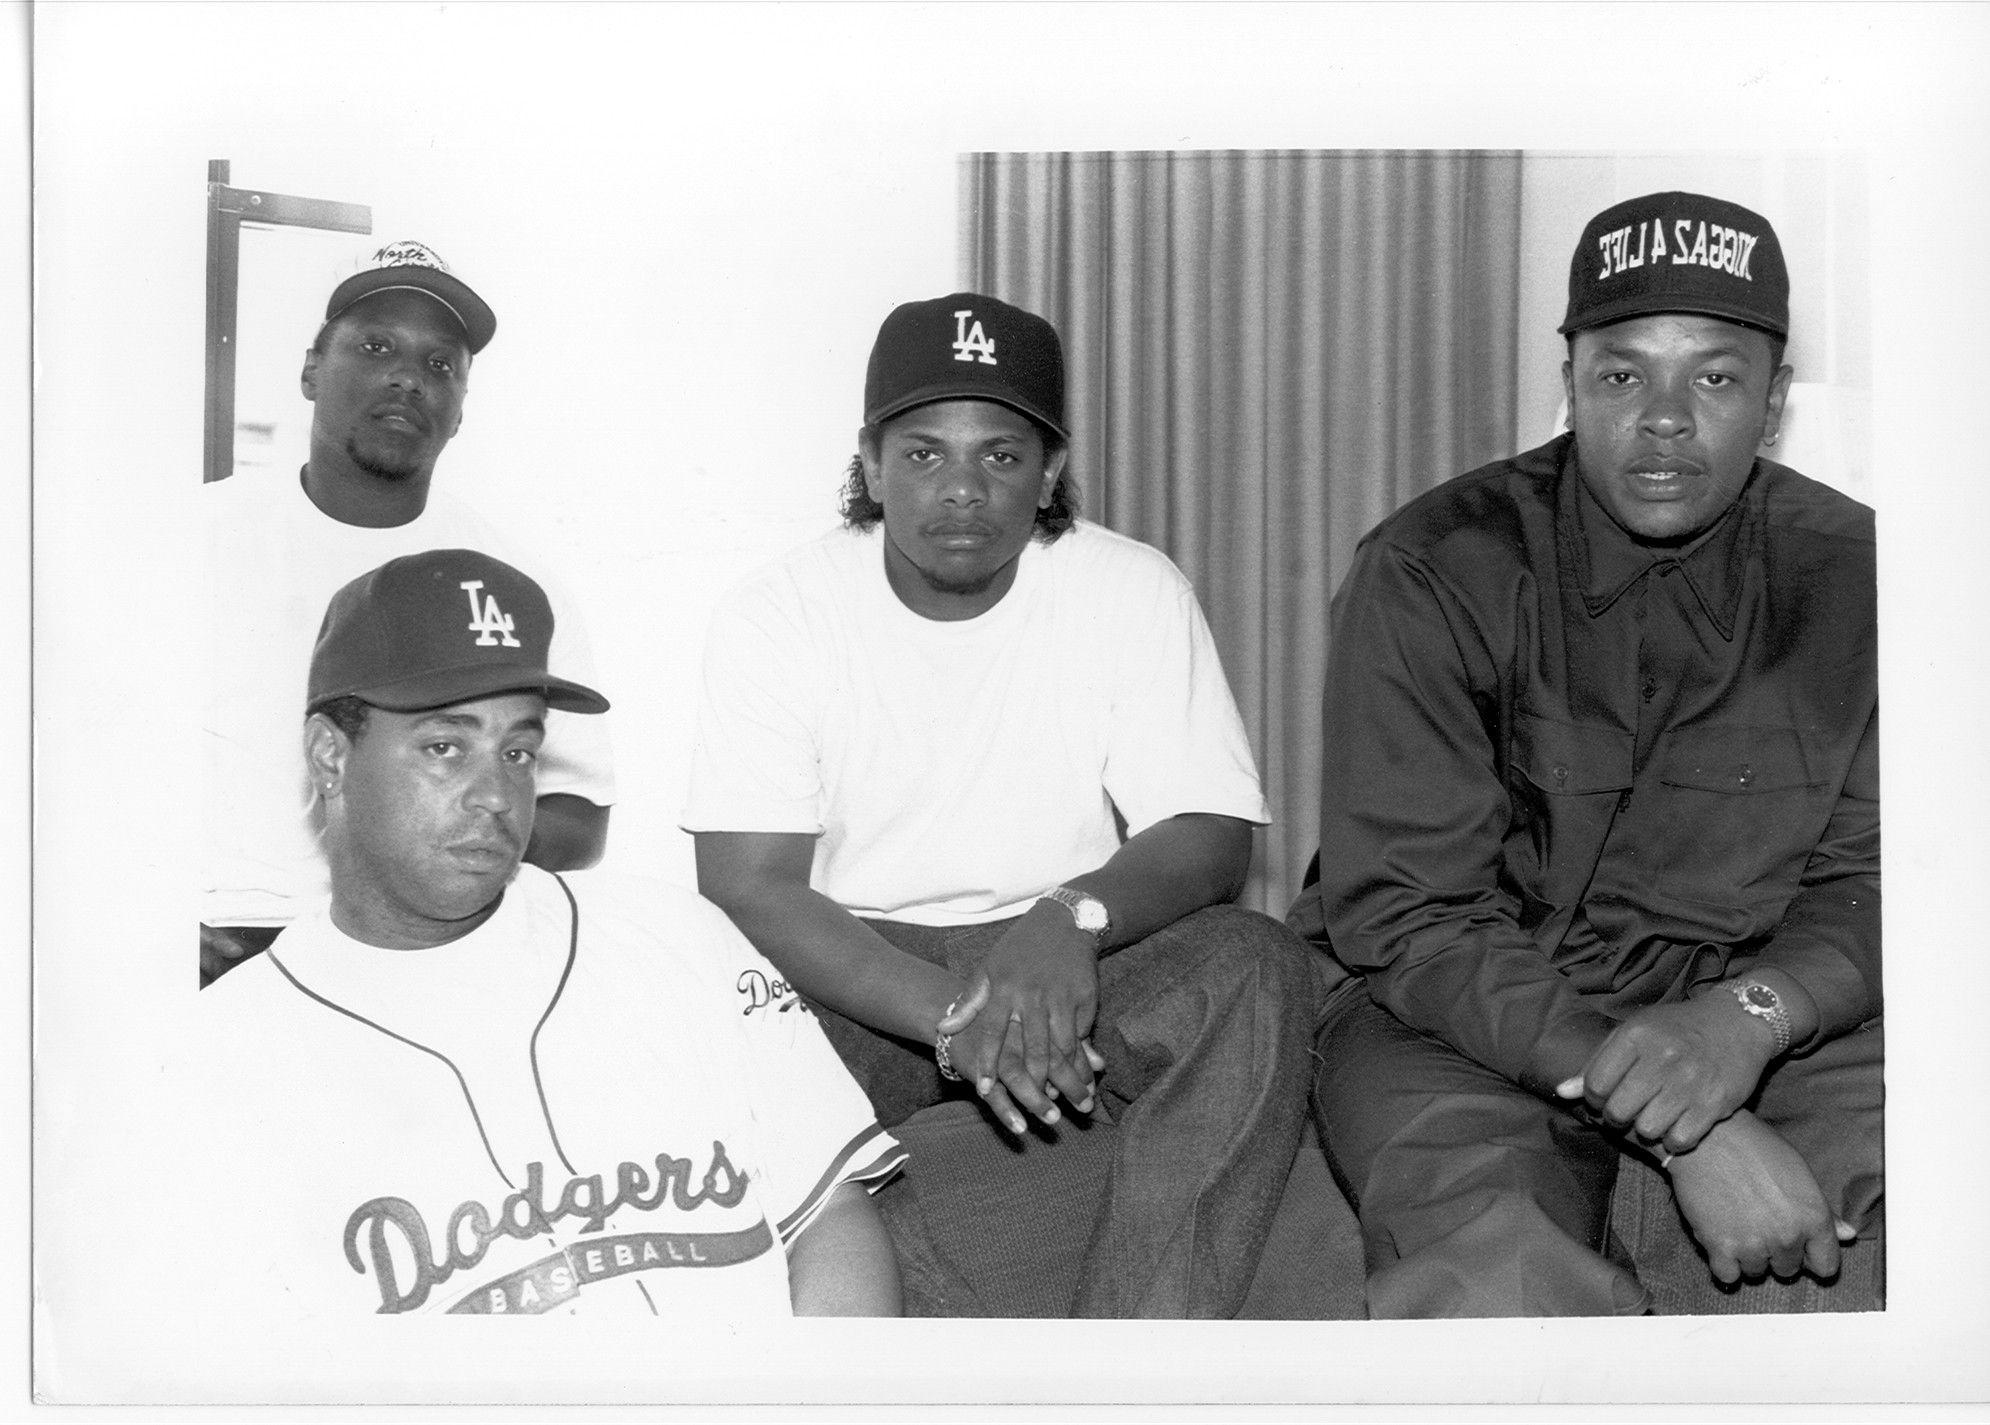 Image For > Nwa Wallpapers Iphone